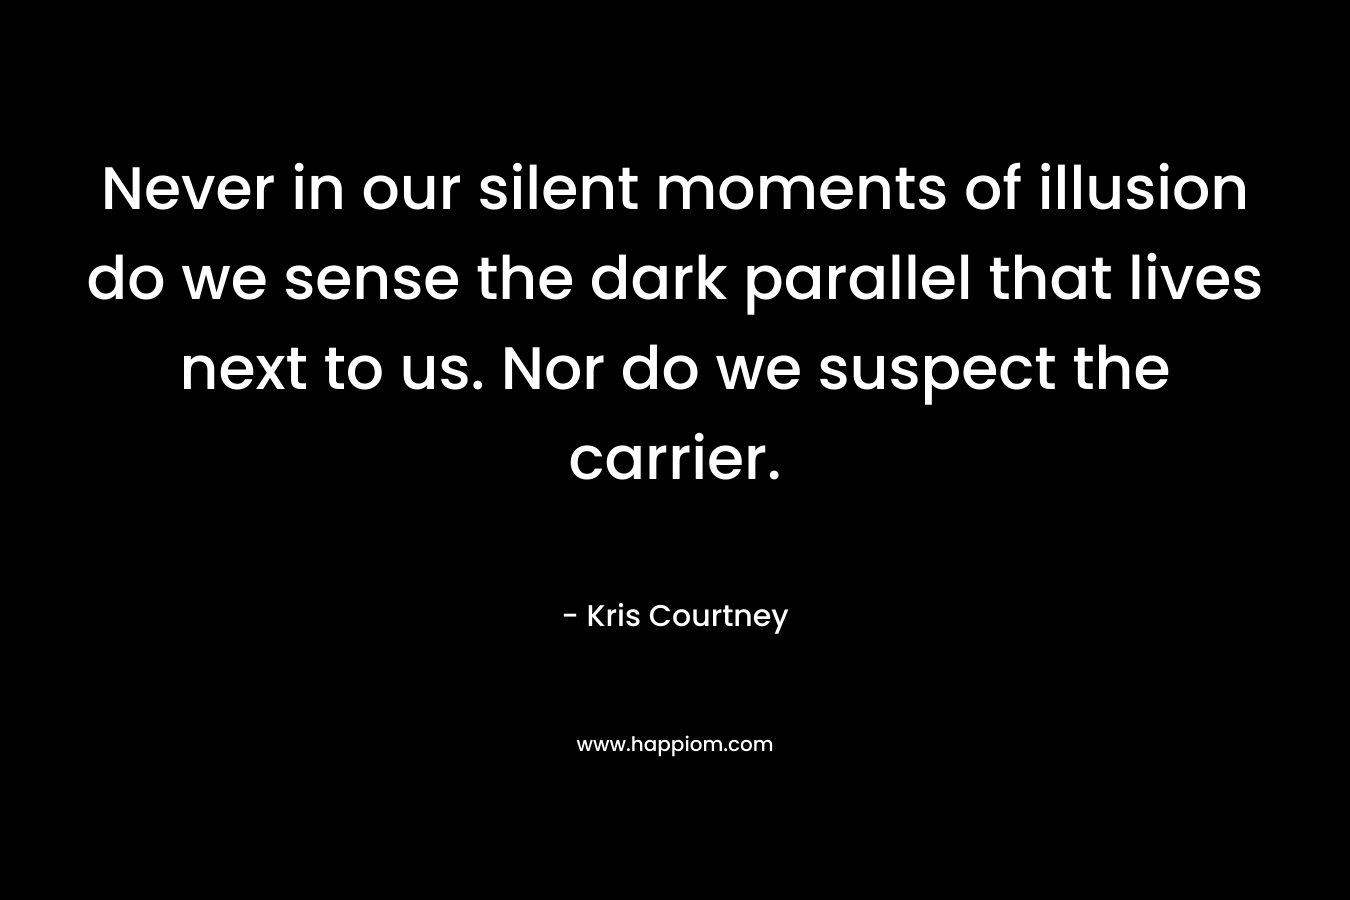 Never in our silent moments of illusion do we sense the dark parallel that lives next to us. Nor do we suspect the carrier.